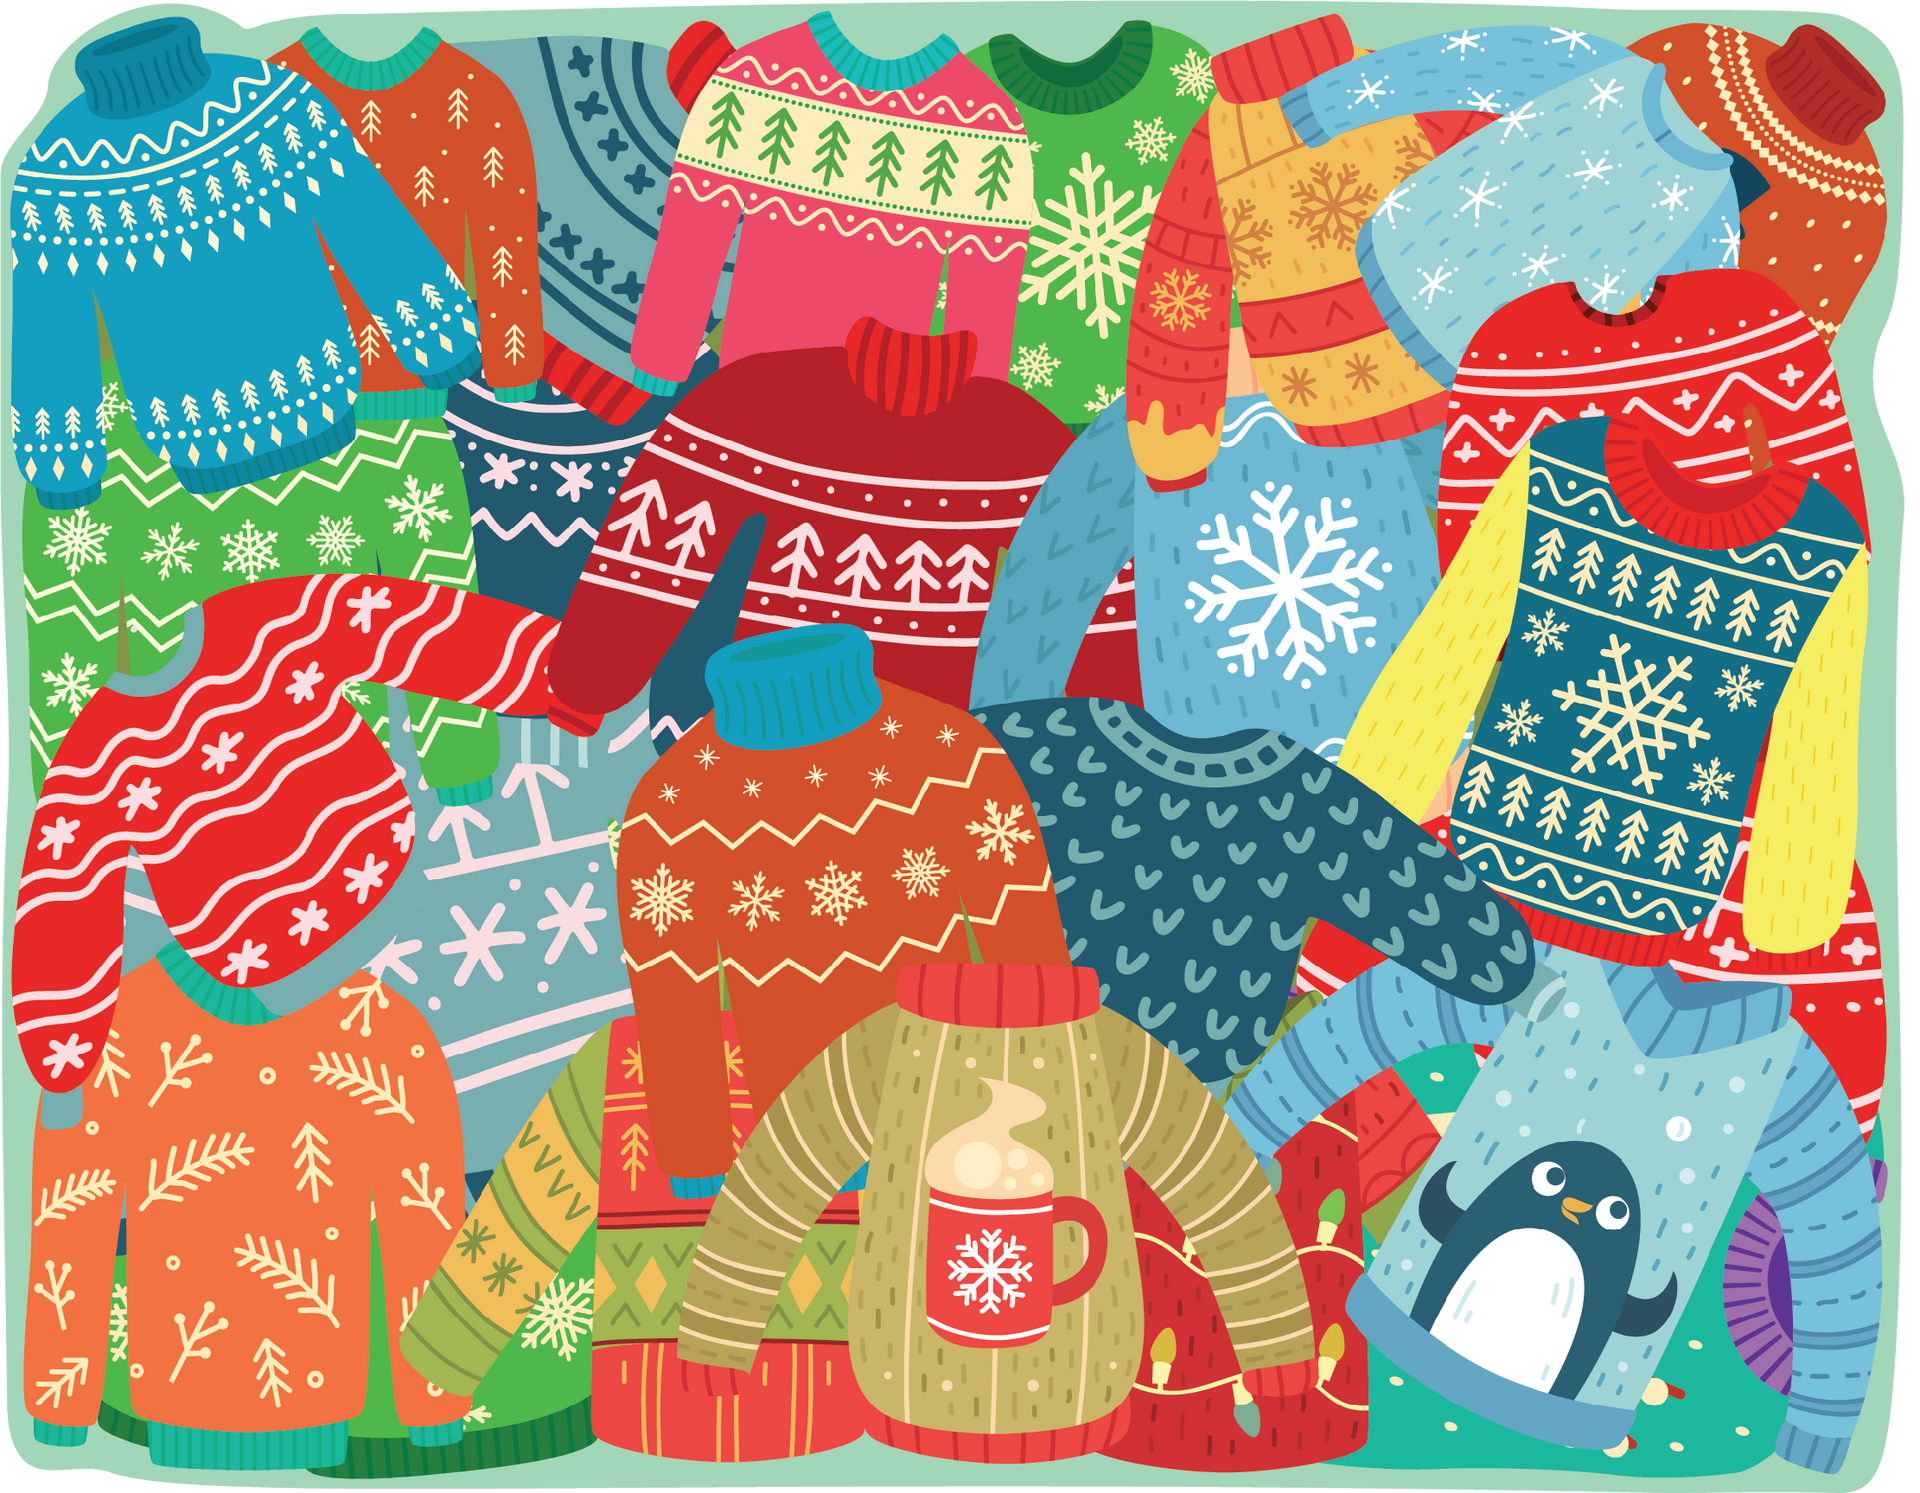 Ugly Christmas Sweaters Vintage Colors Wrapping Paper by Sandra